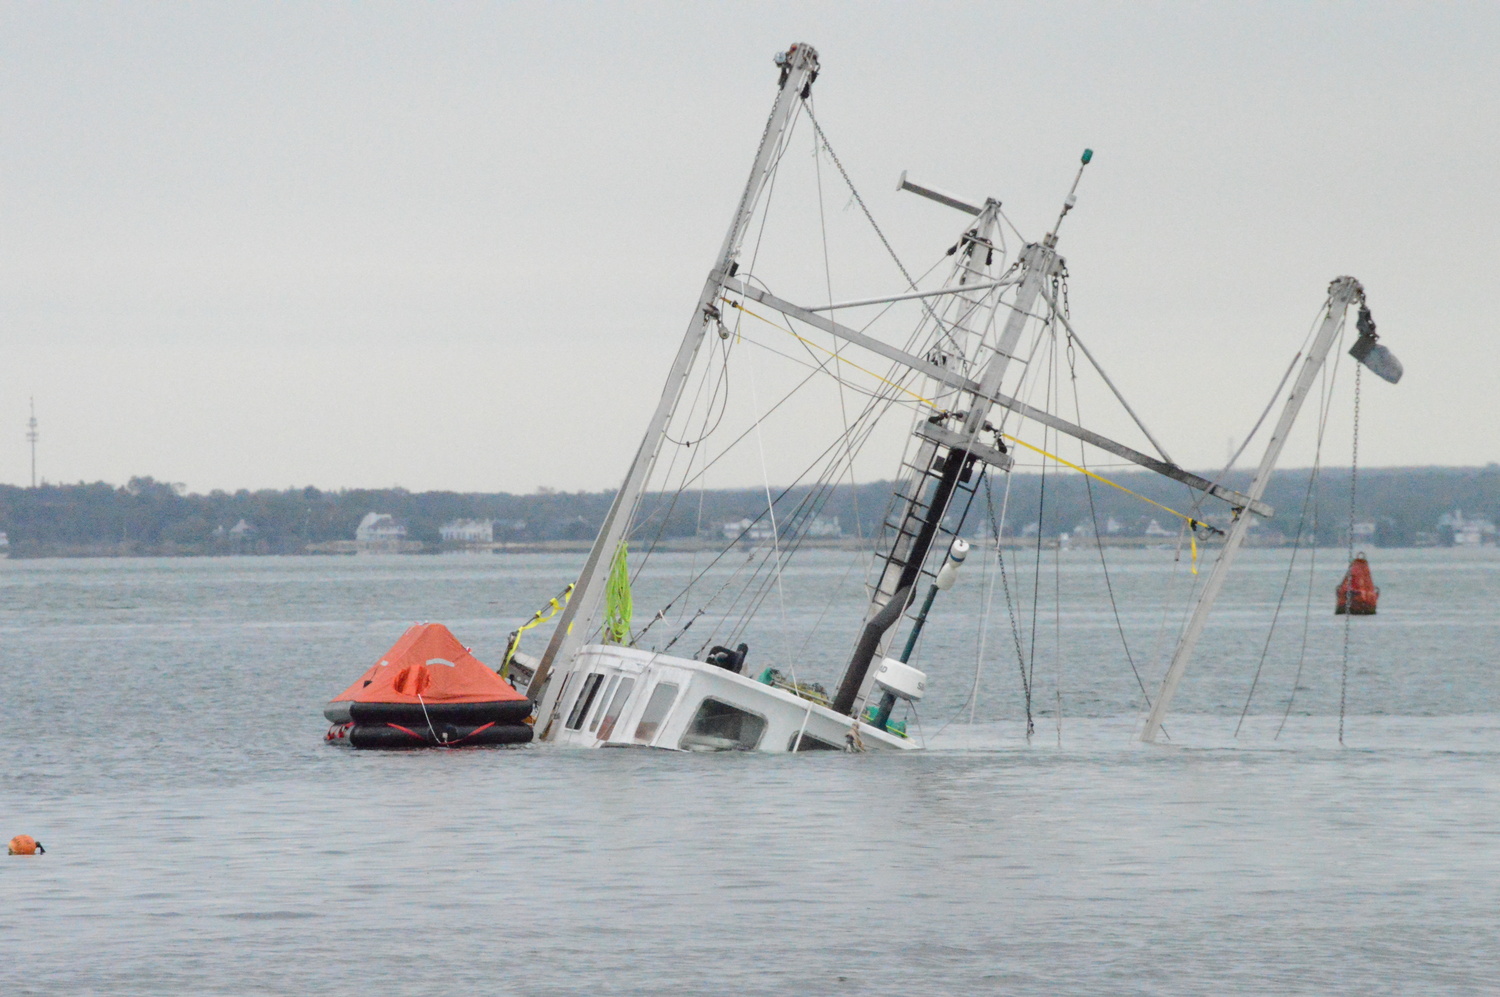 The Kary Ann was towed to a spot off of Road I in Shinnecock Bay. Salvage operations were to begin on October 18, said the Coast Guard. TOM GOGOLA